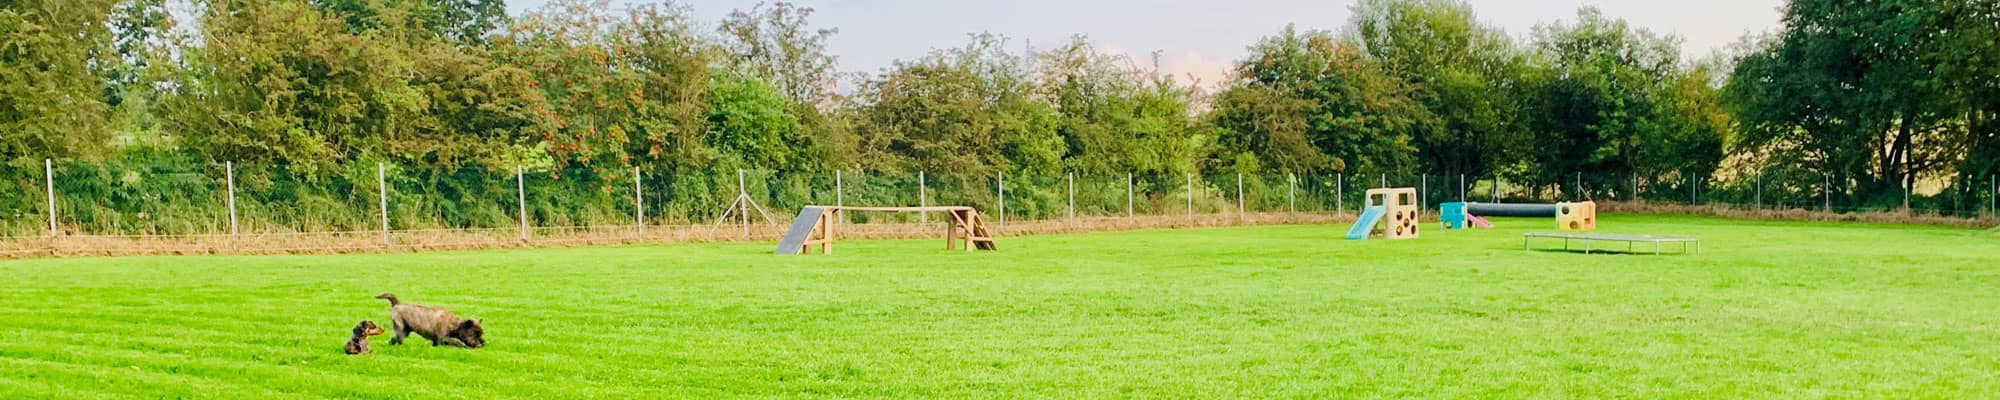 Dogs in field with agility equipment in Ruthin